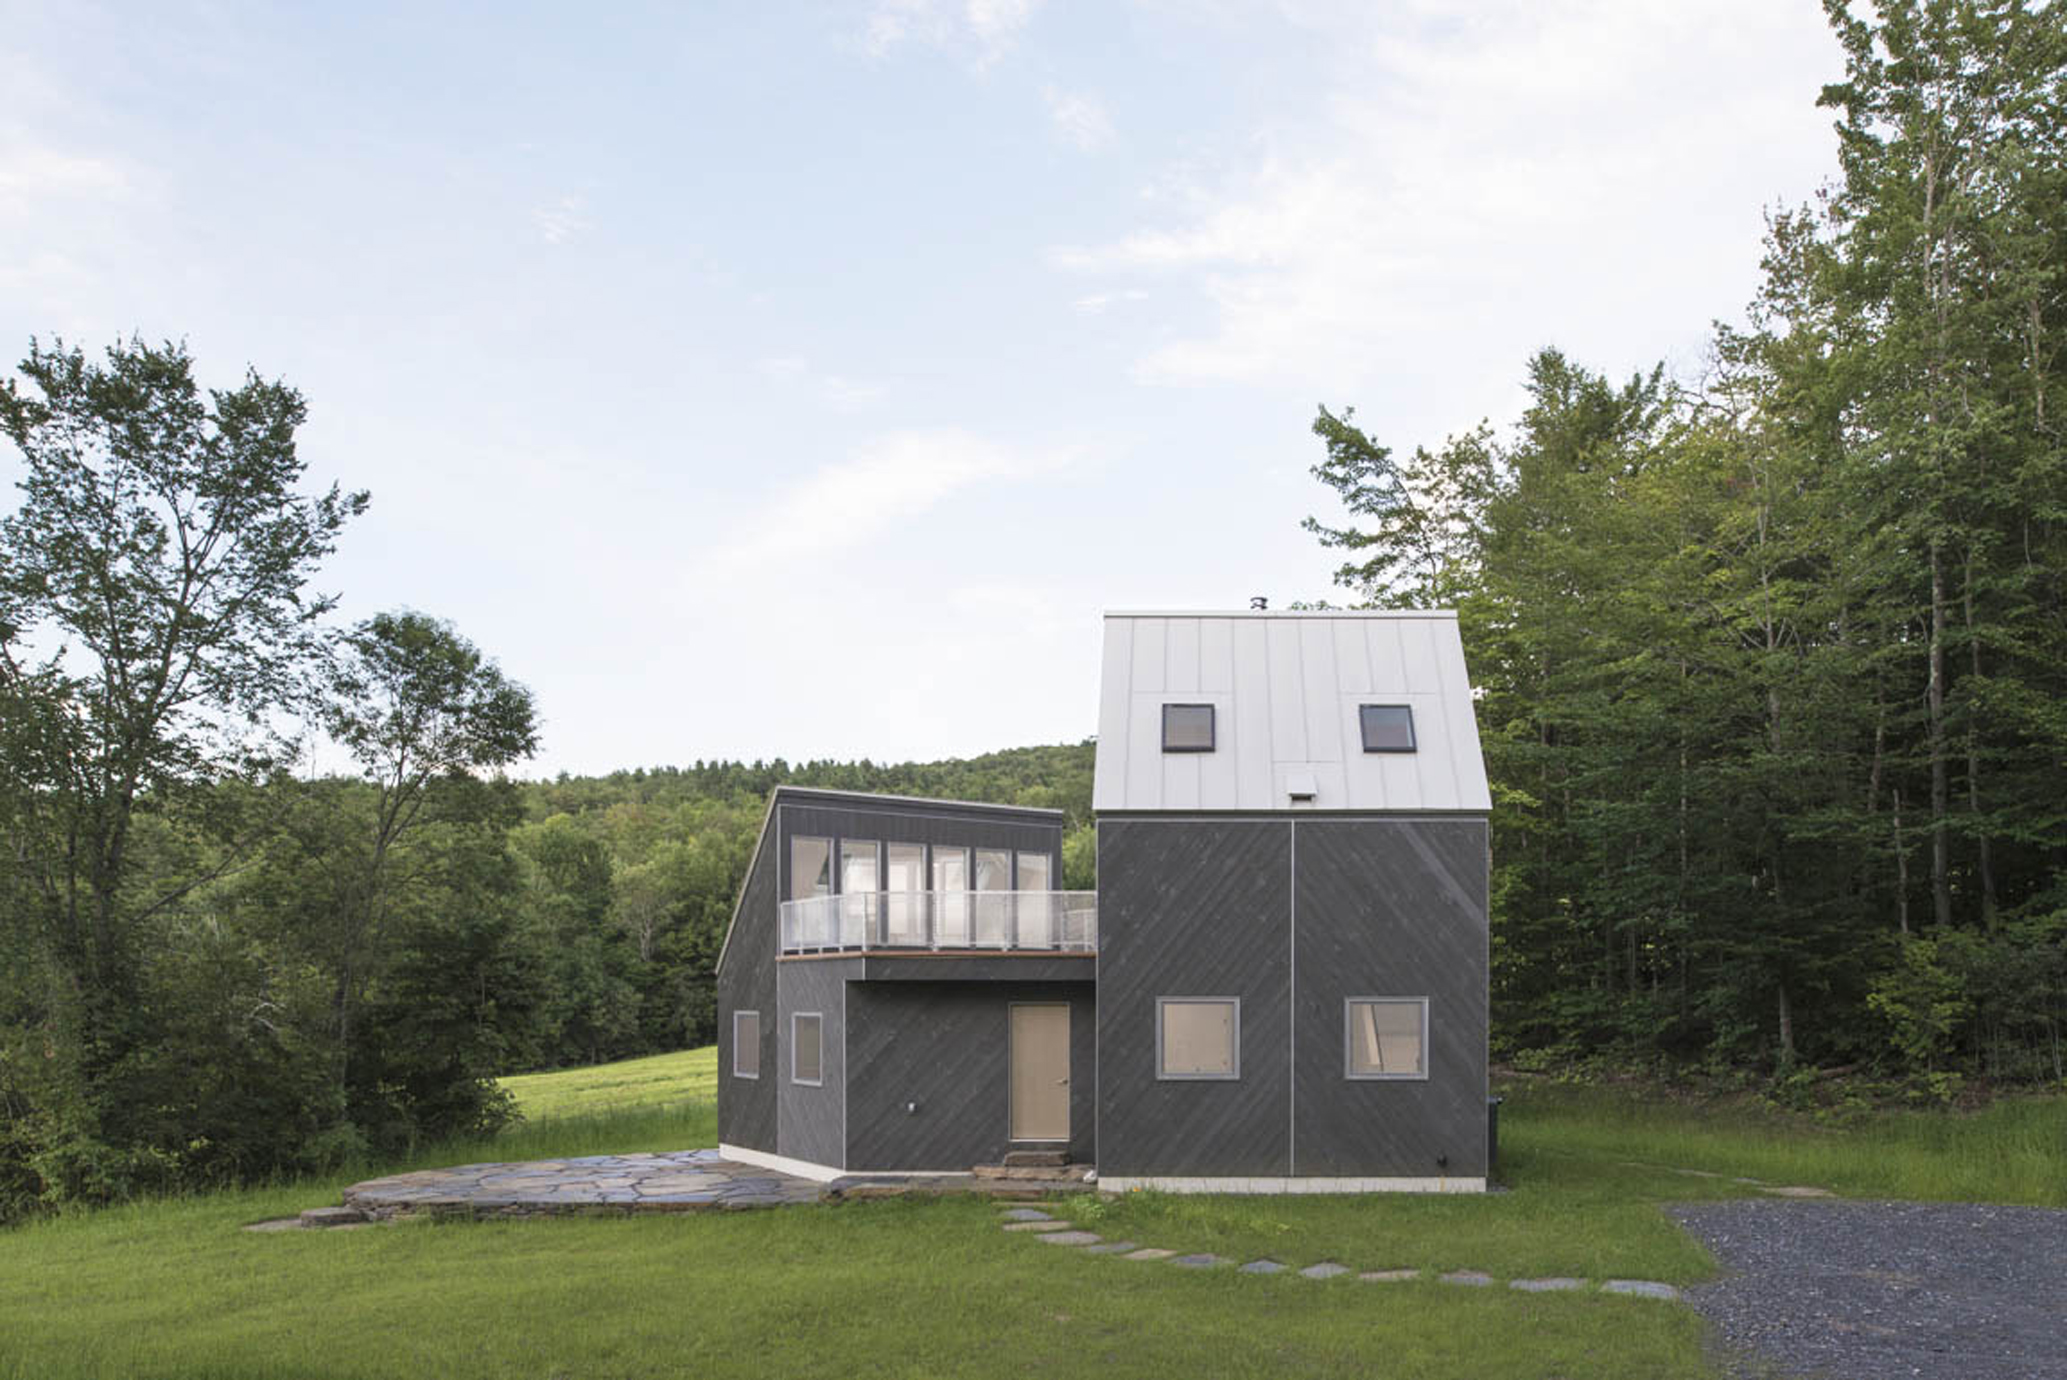 A small Vermont painting studio takes design cues from local vernacular.